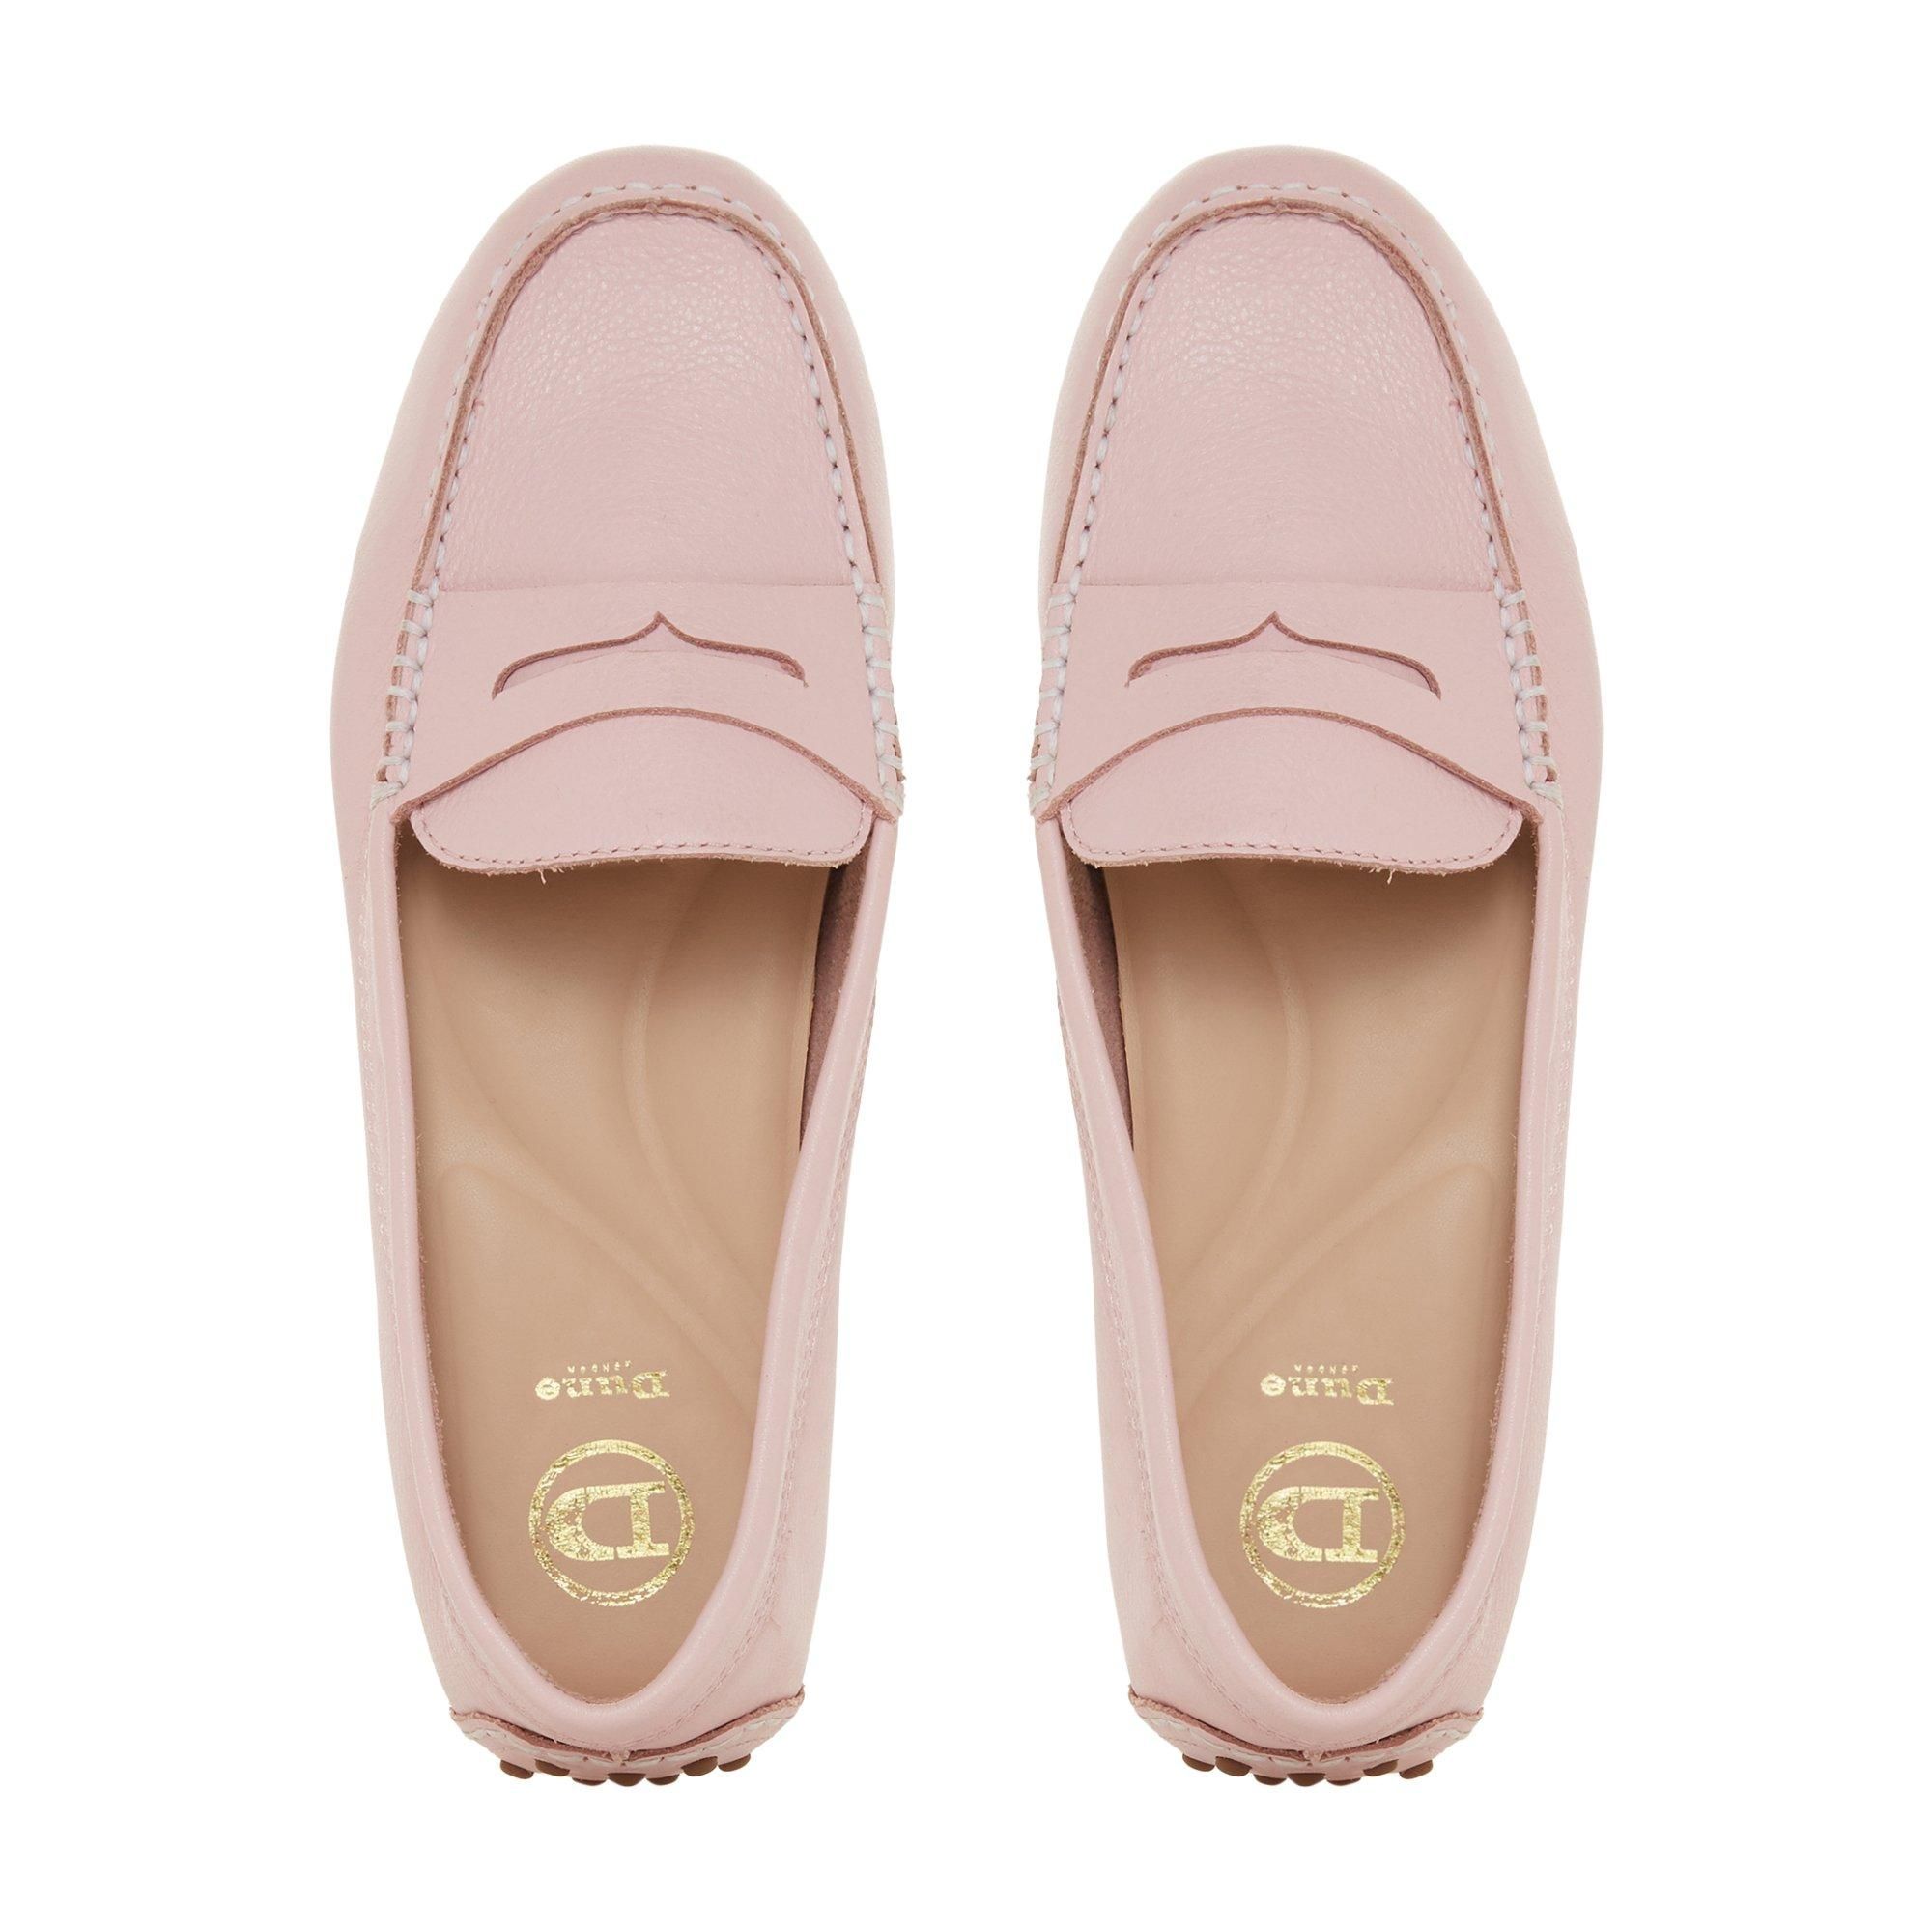 The Grover loafer from Dune London is a smart styling option. Crafted from leather, it features a square toe and a rubber sole. Complete with apron stitching and classic saddle strap detailing.